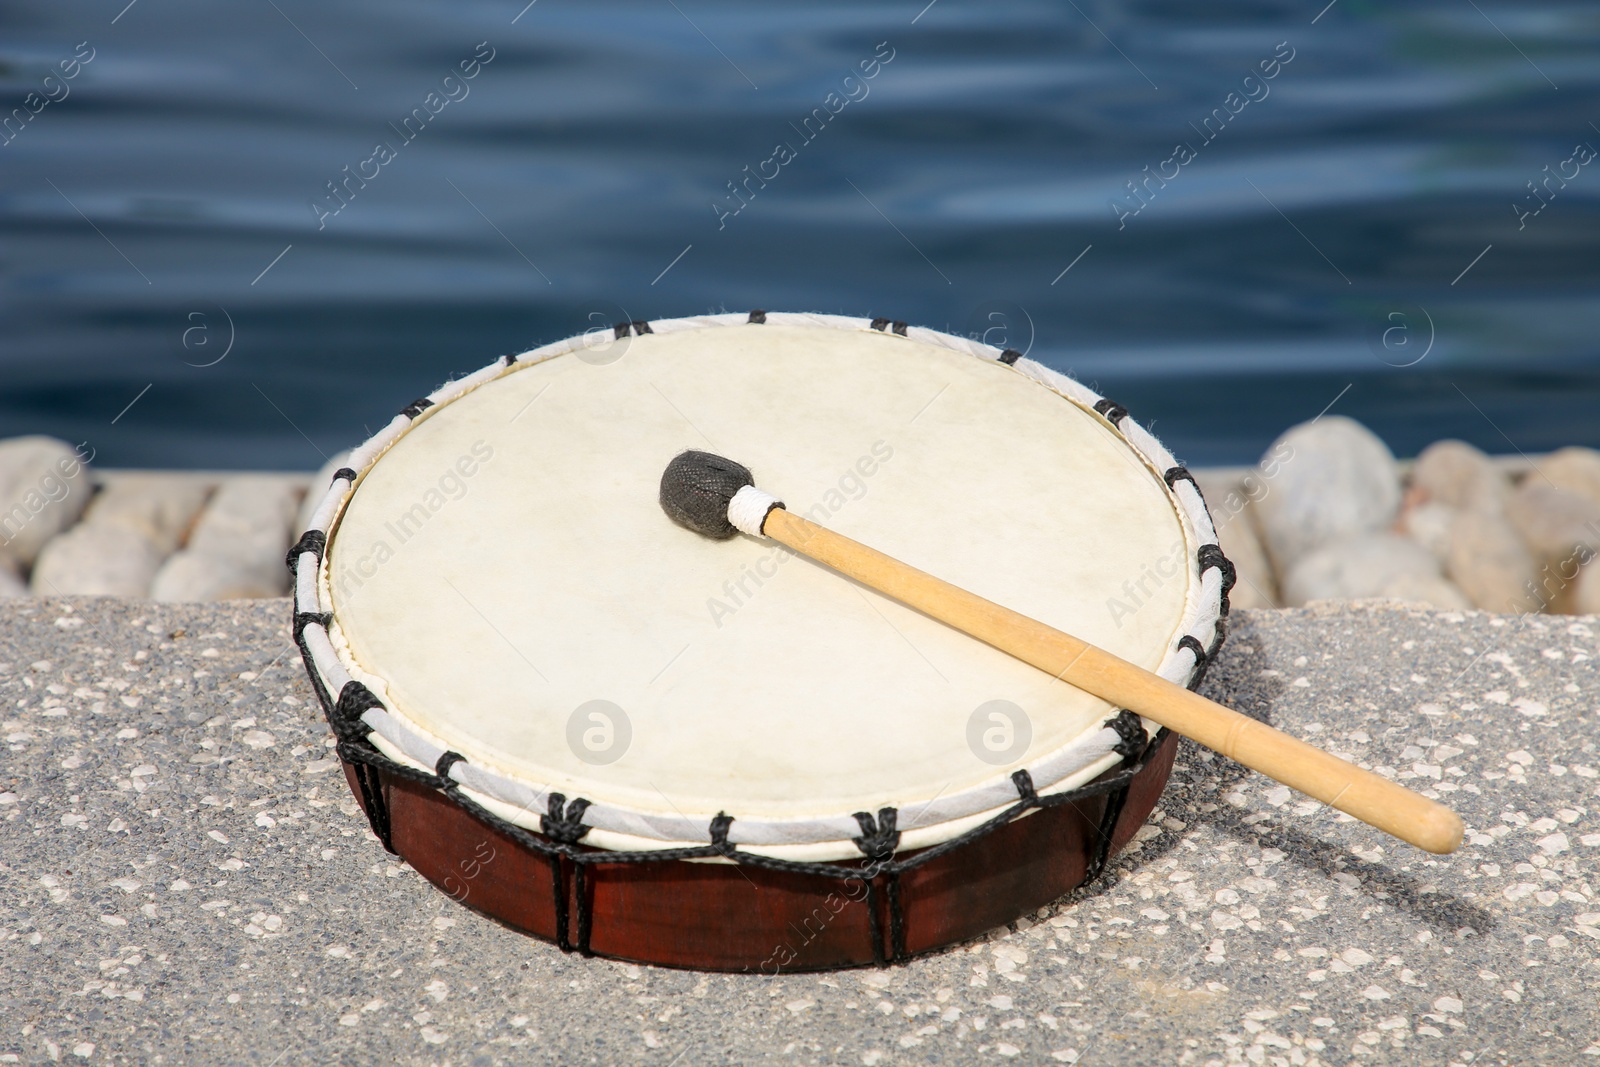 Photo of Drum and drumstick near sea. Percussion musical instrument